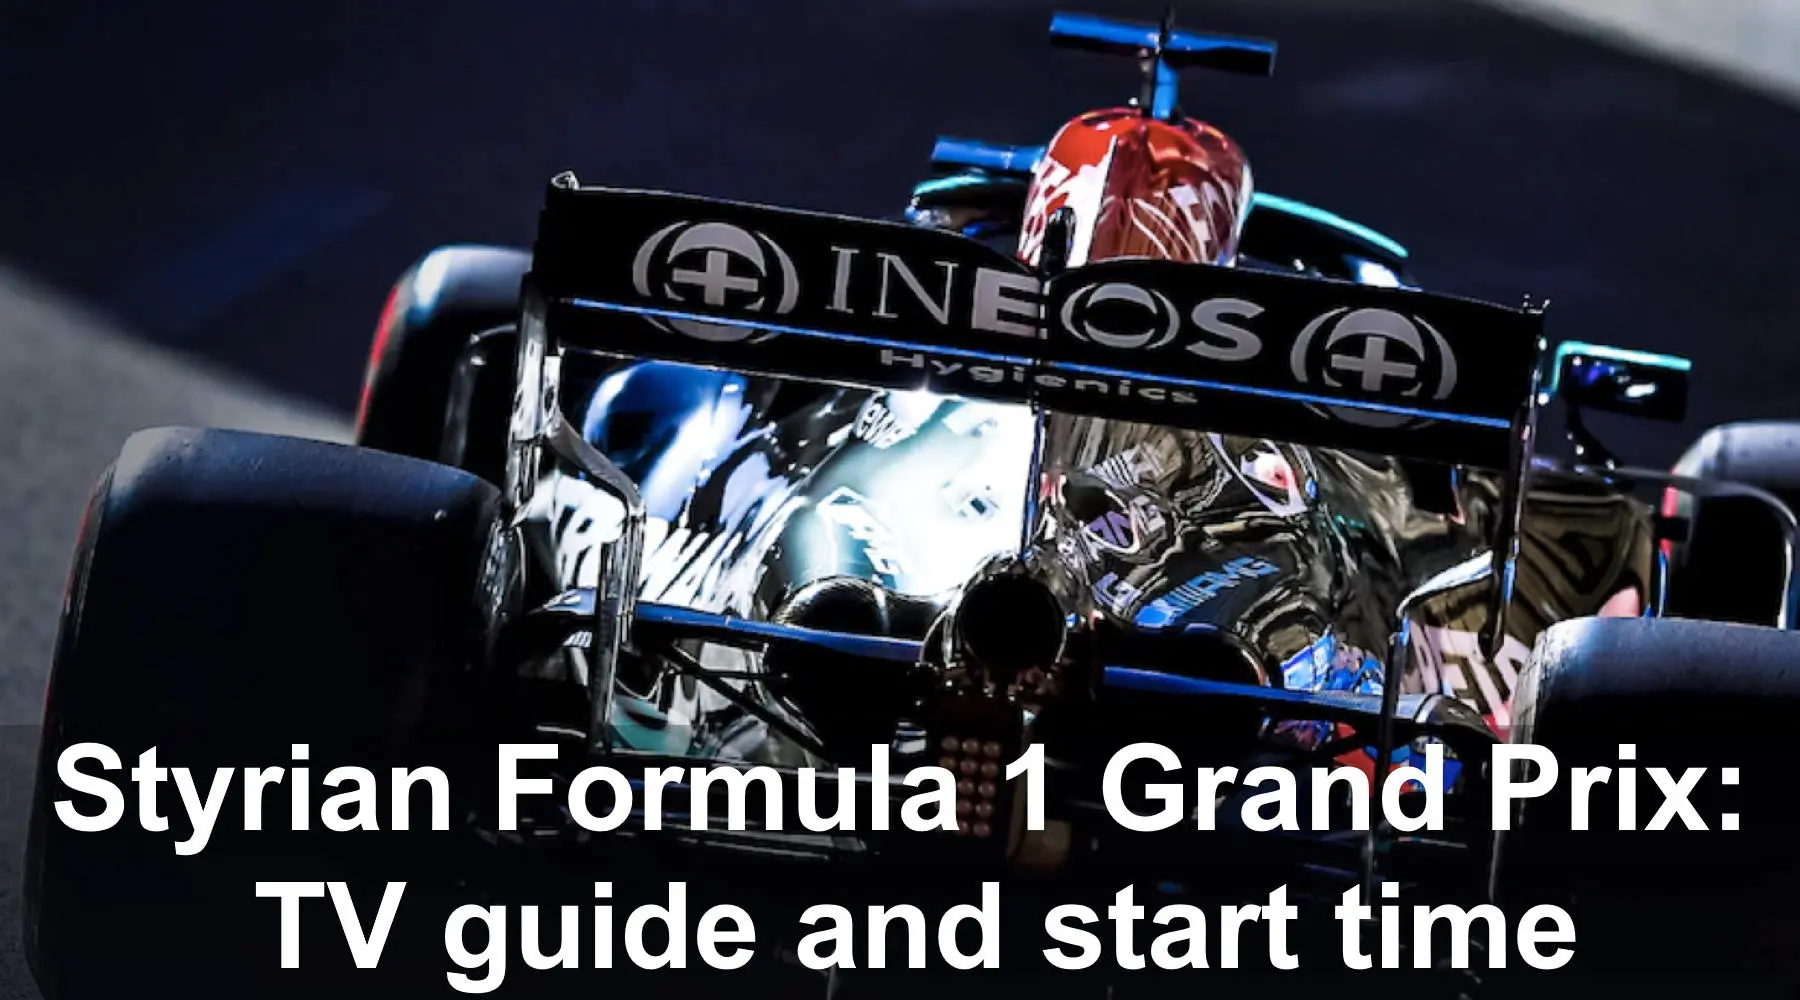 How to watch Styrian Formula 1 Grand Prix live and free in Australia